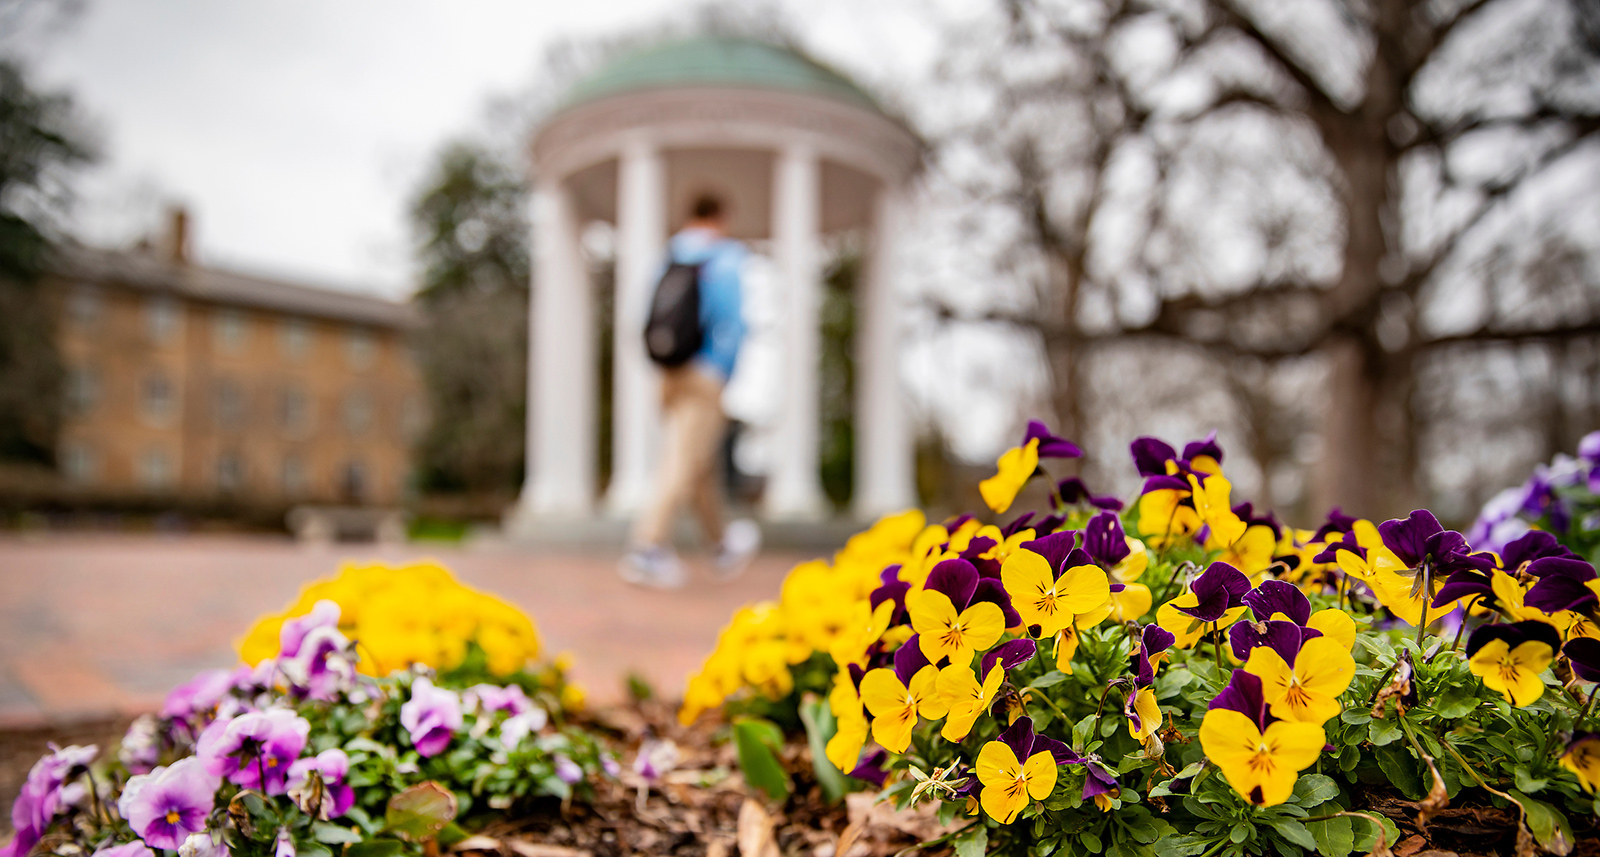 A student walks near the Old Well in front of flowers.